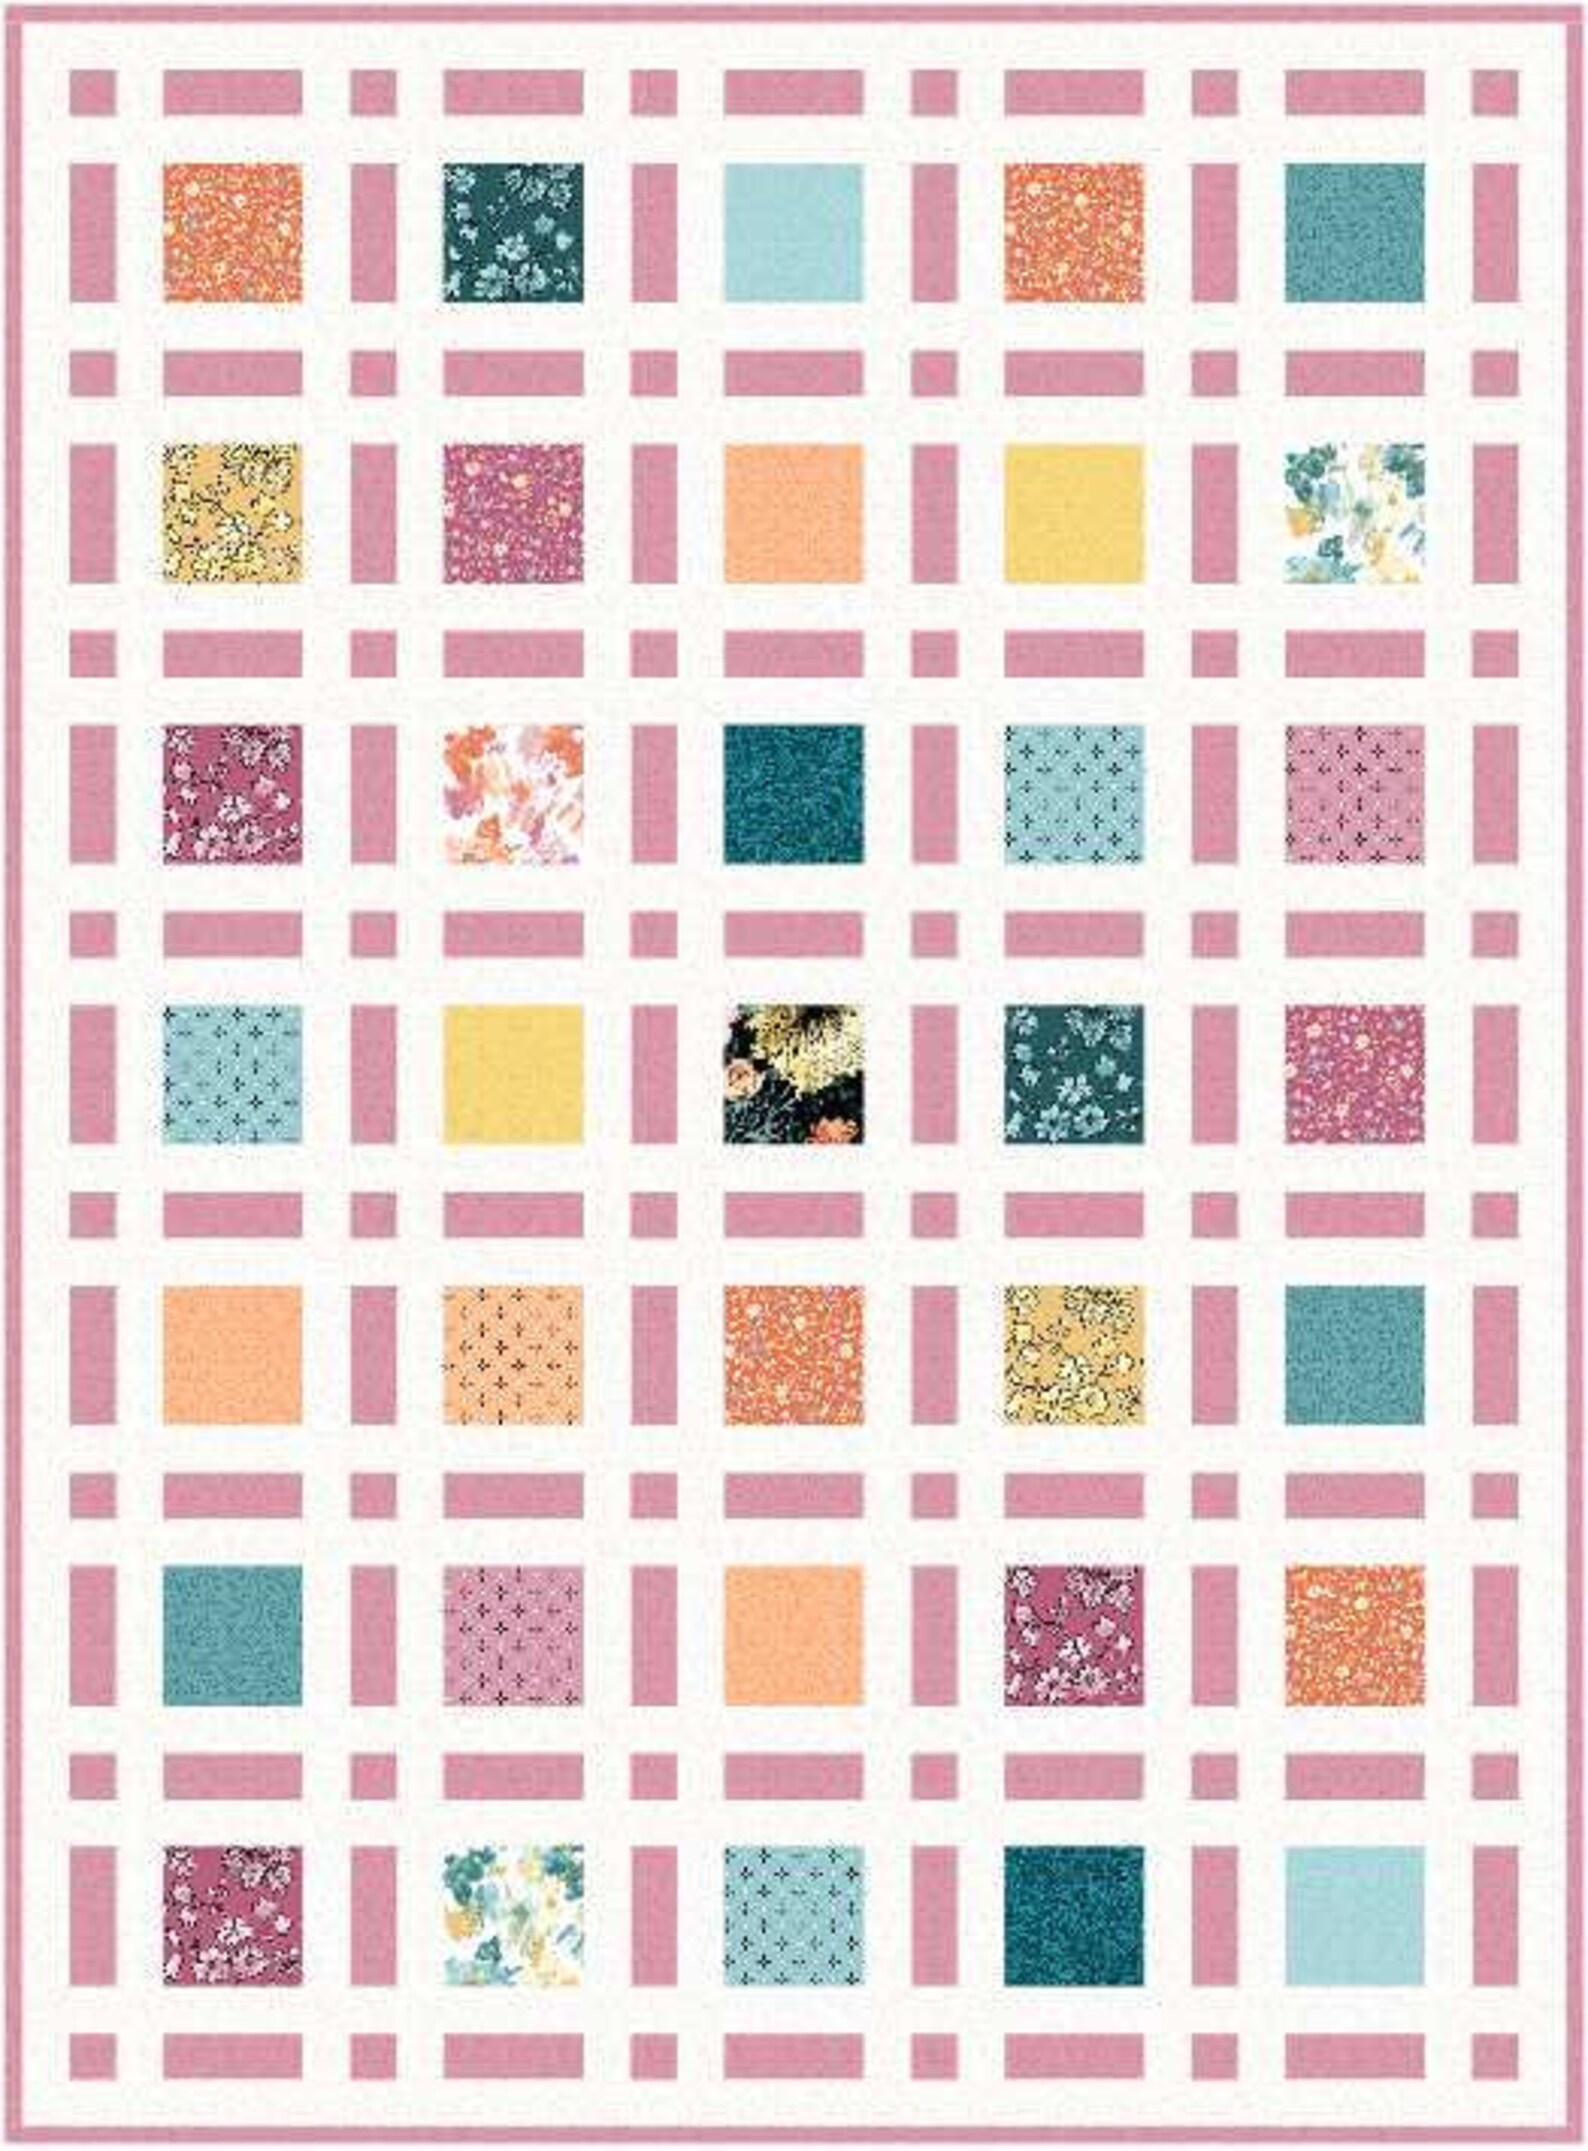 Broken Frames Digital Quilt Pattern Baby Lap and Twin - Etsy